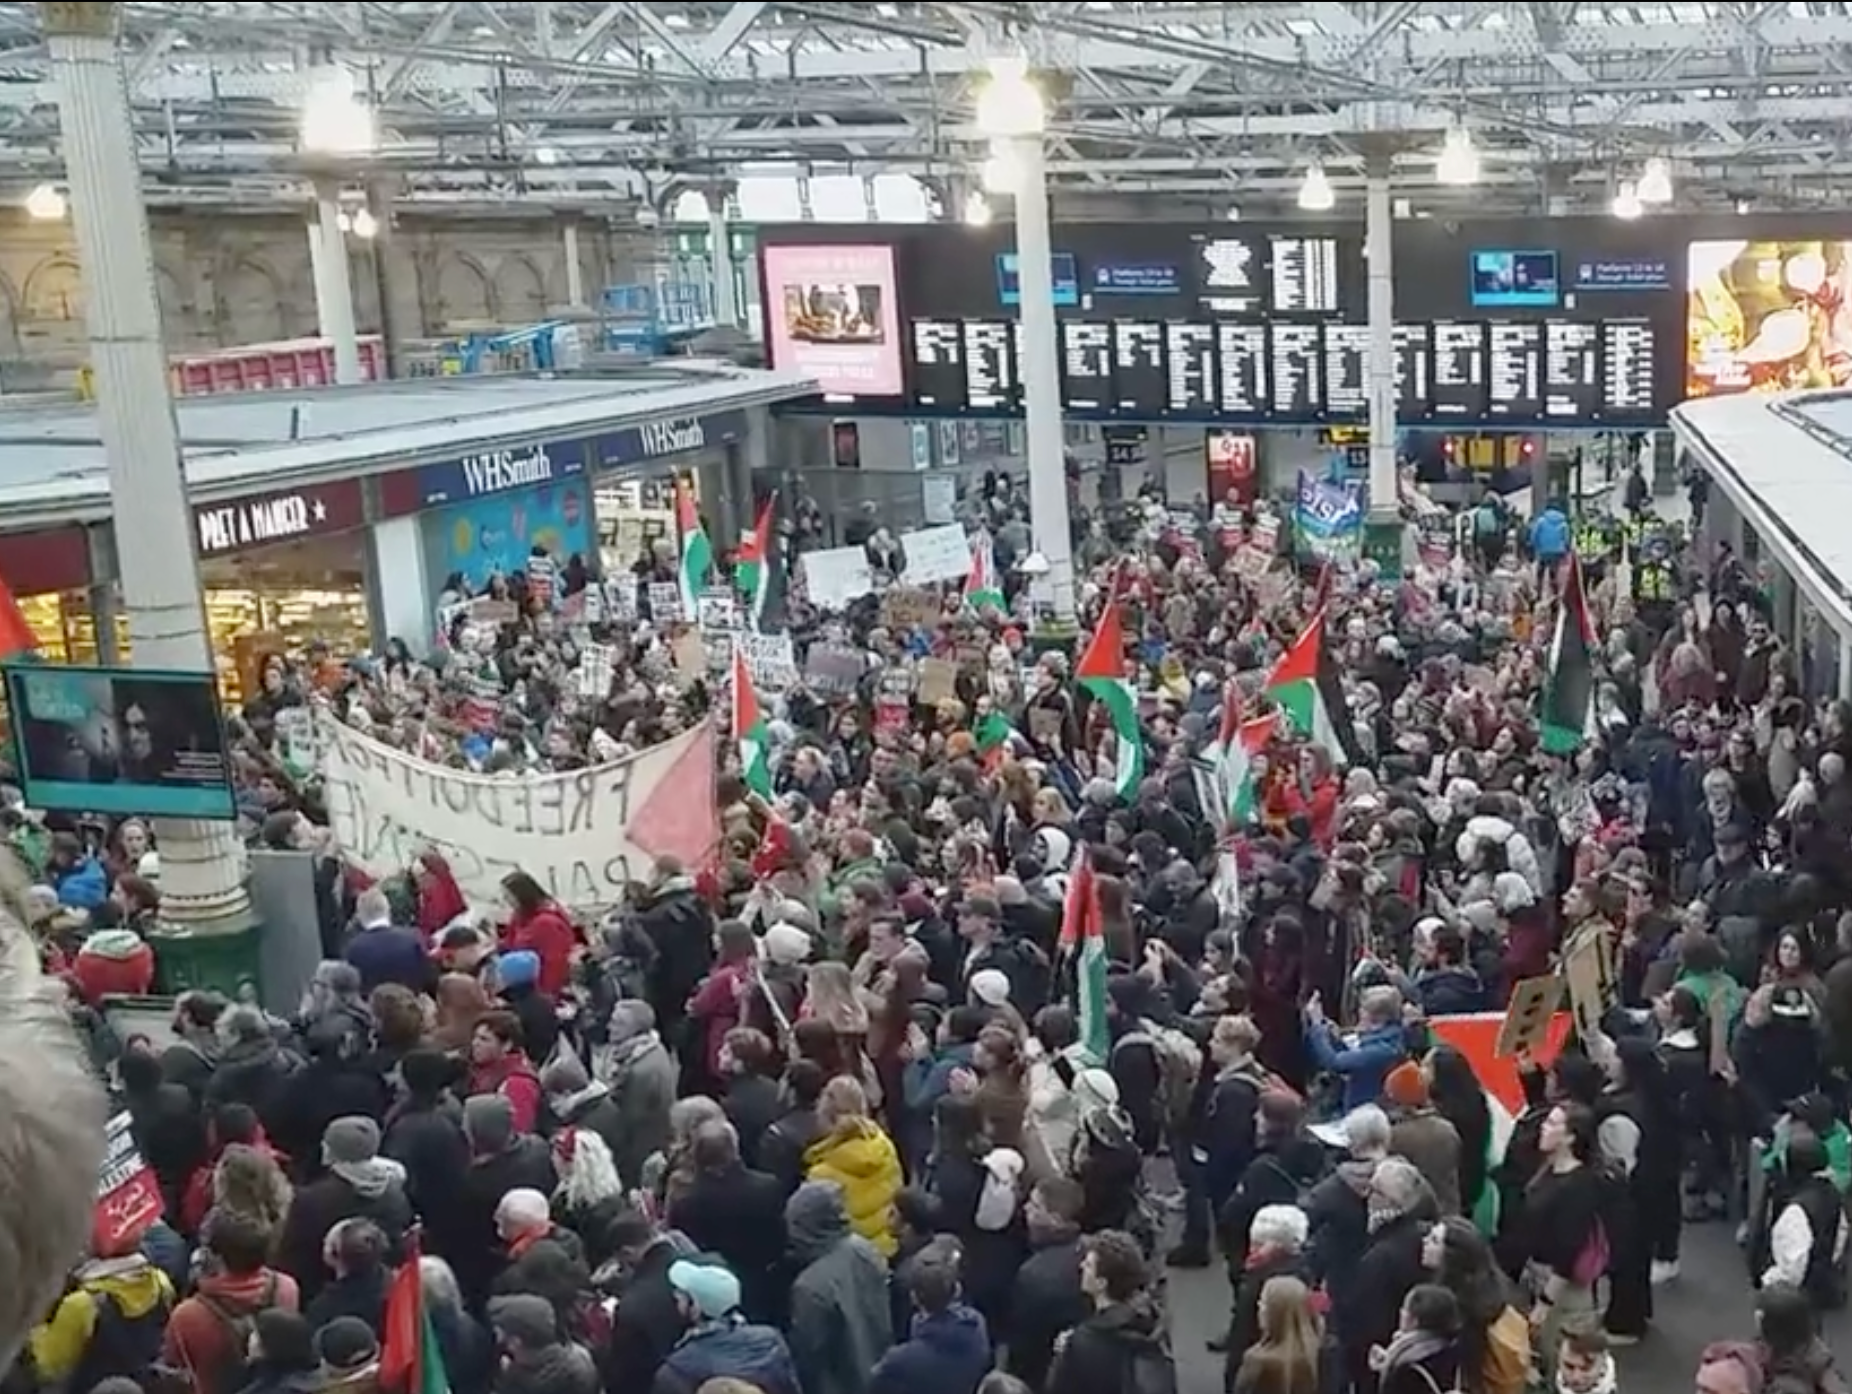 Protest at Edinburgh Waverley on Saturday - Mr Henderson can be seen stood behind a large banner.